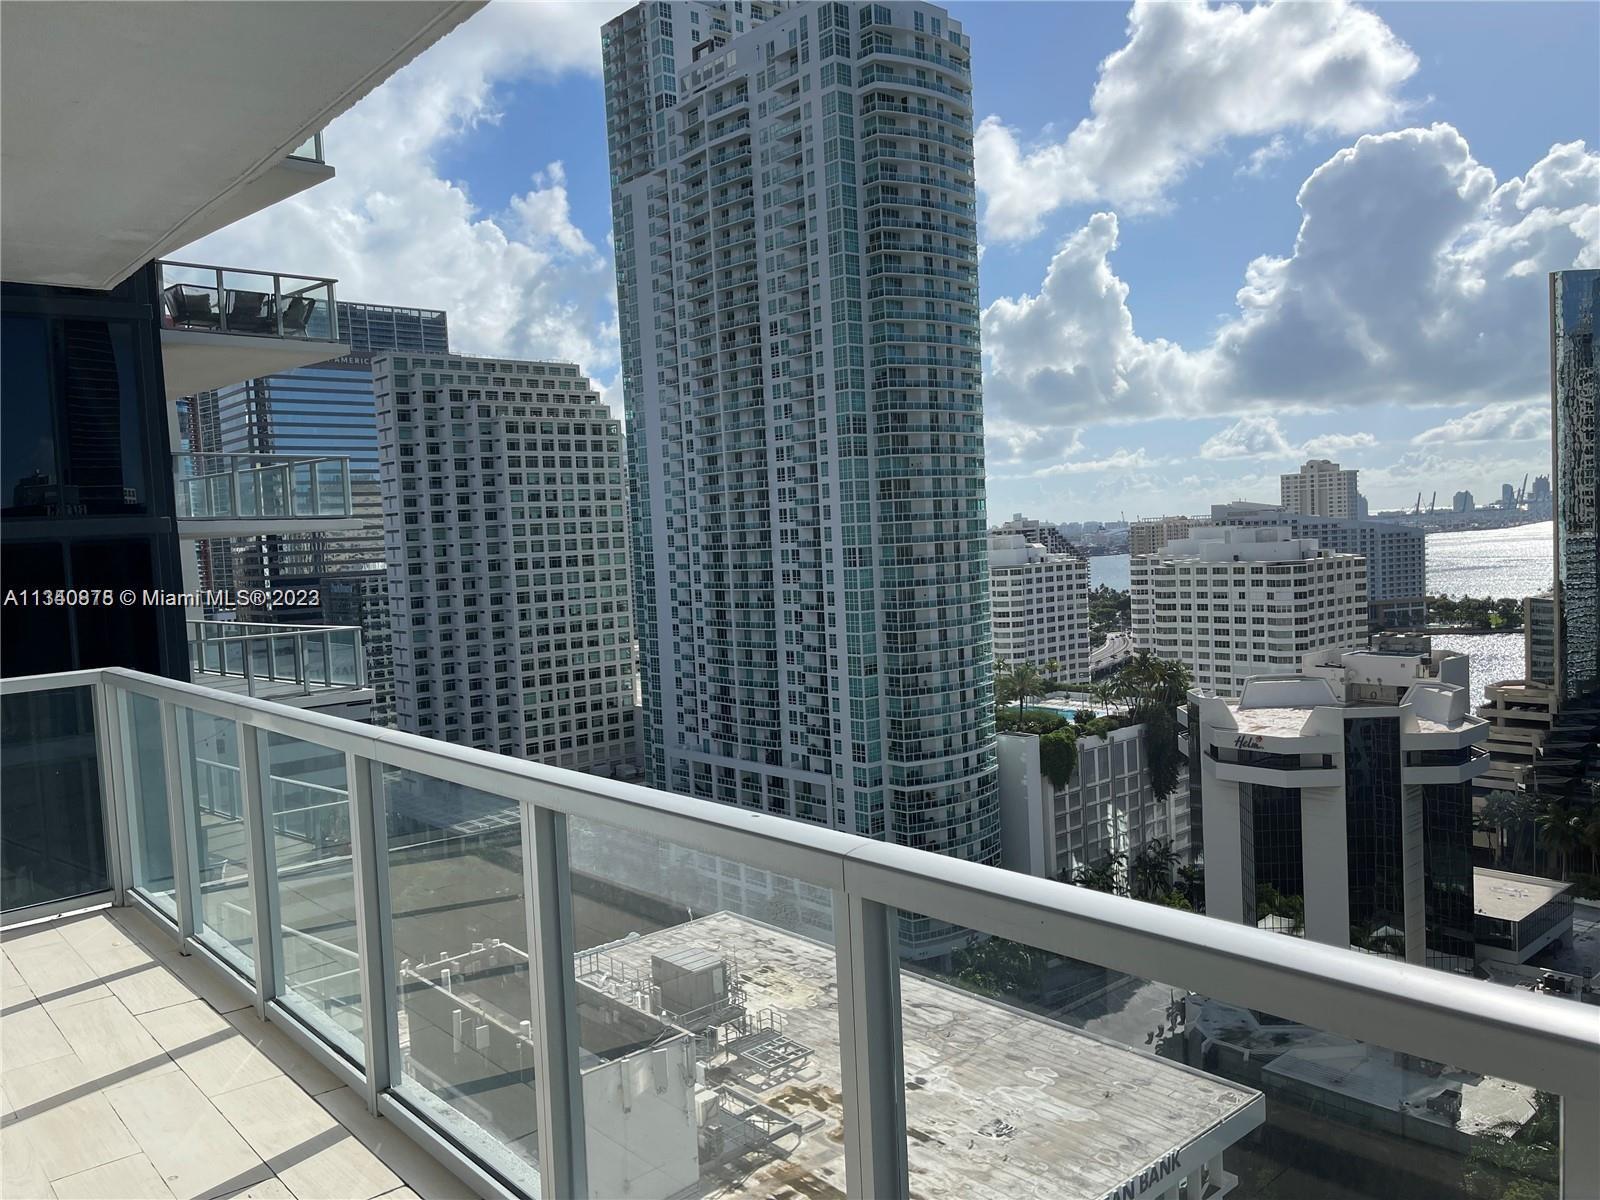 New life by living in the city Premier Brickell Ave address, proximity to many restaurants, bars, cafes, steps to Mary Brickell Village & City Centre, adjacent to People Mover and Metrorail station. Well finished residence with marble floors throughout, open kitchen, private entrance, tons of natural light, east facing balcony. Amenities include swimming pool, gym, concierge, valet and lots more. Close to restaurants.